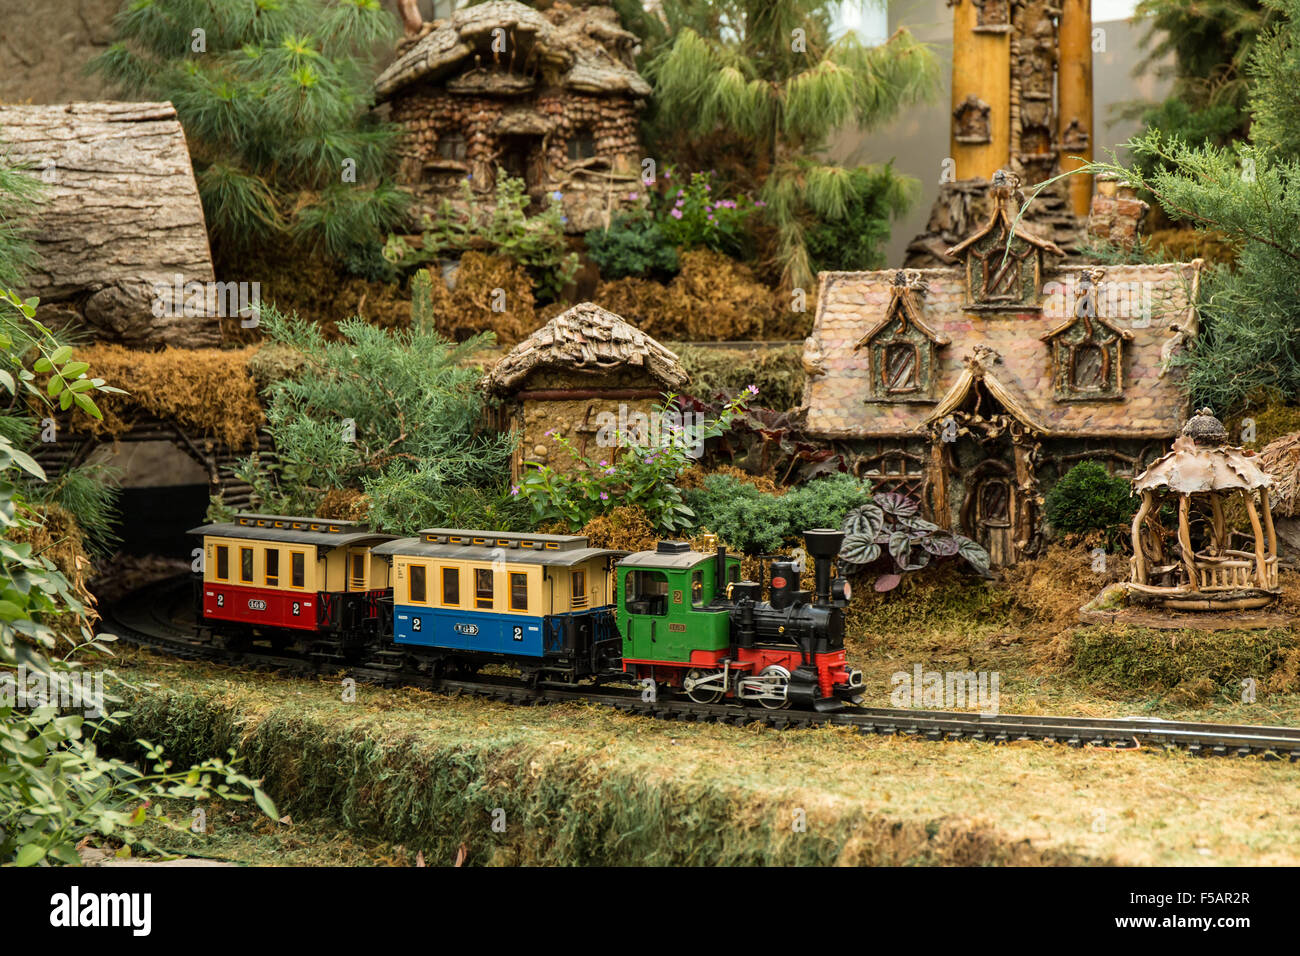 Garden Railroad In The Franklin Park Conservatory And Botanical